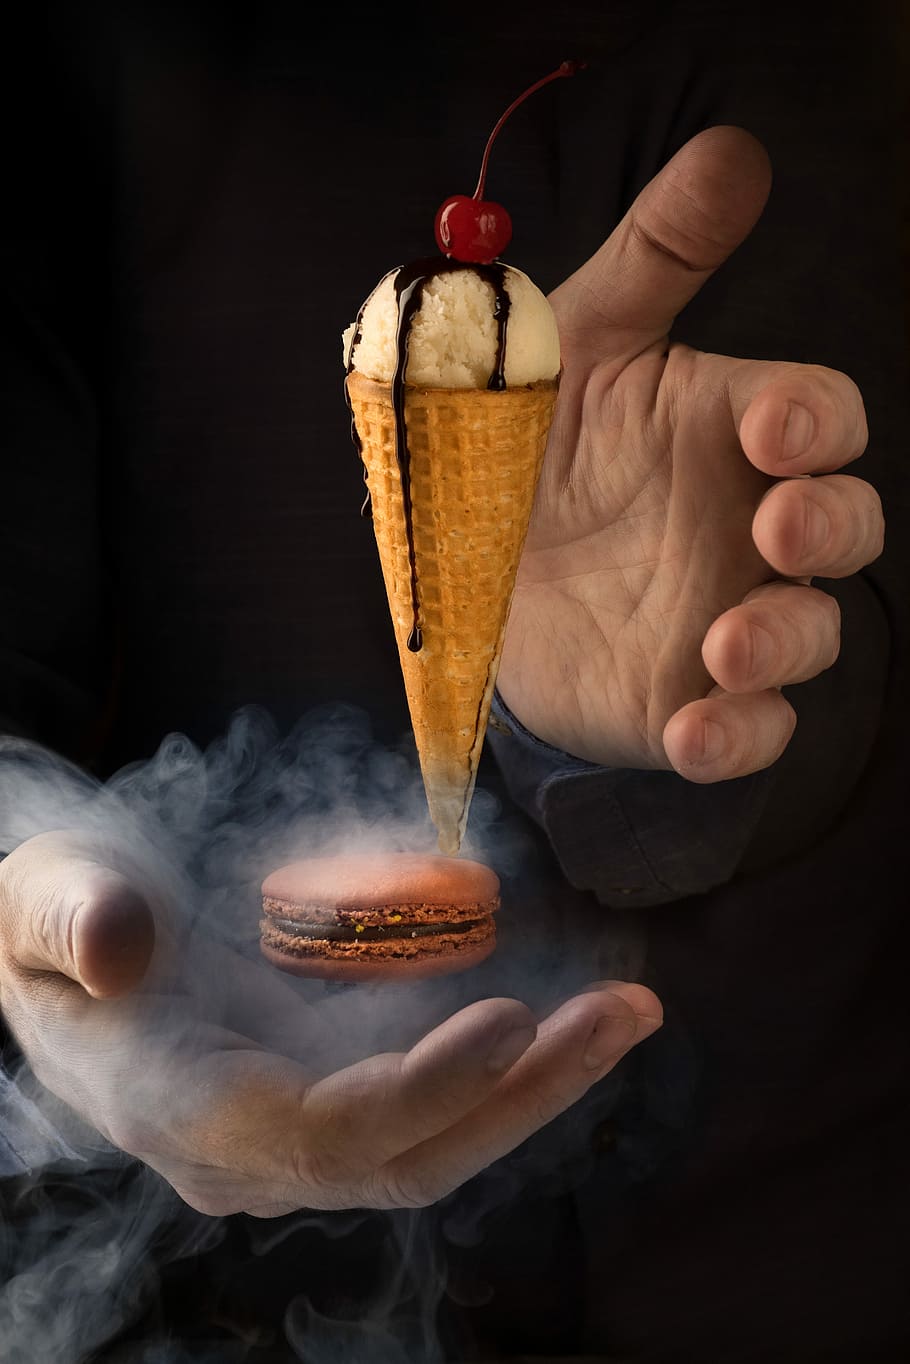 Magic moment, closeup of person's hand beside floating ice cream